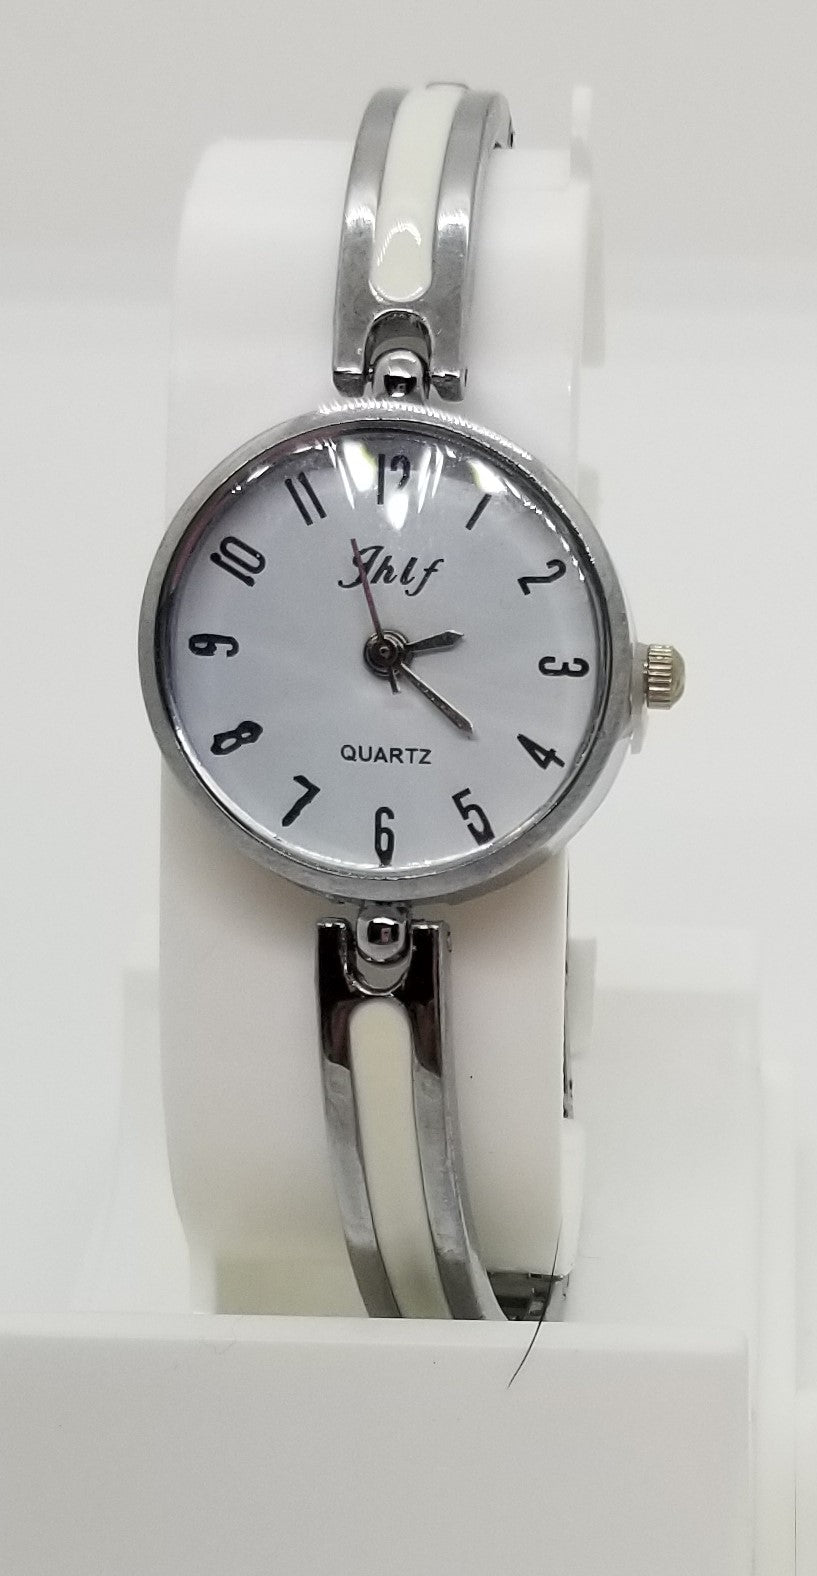 Silver base metal watch with large numbers and a white strip in strap